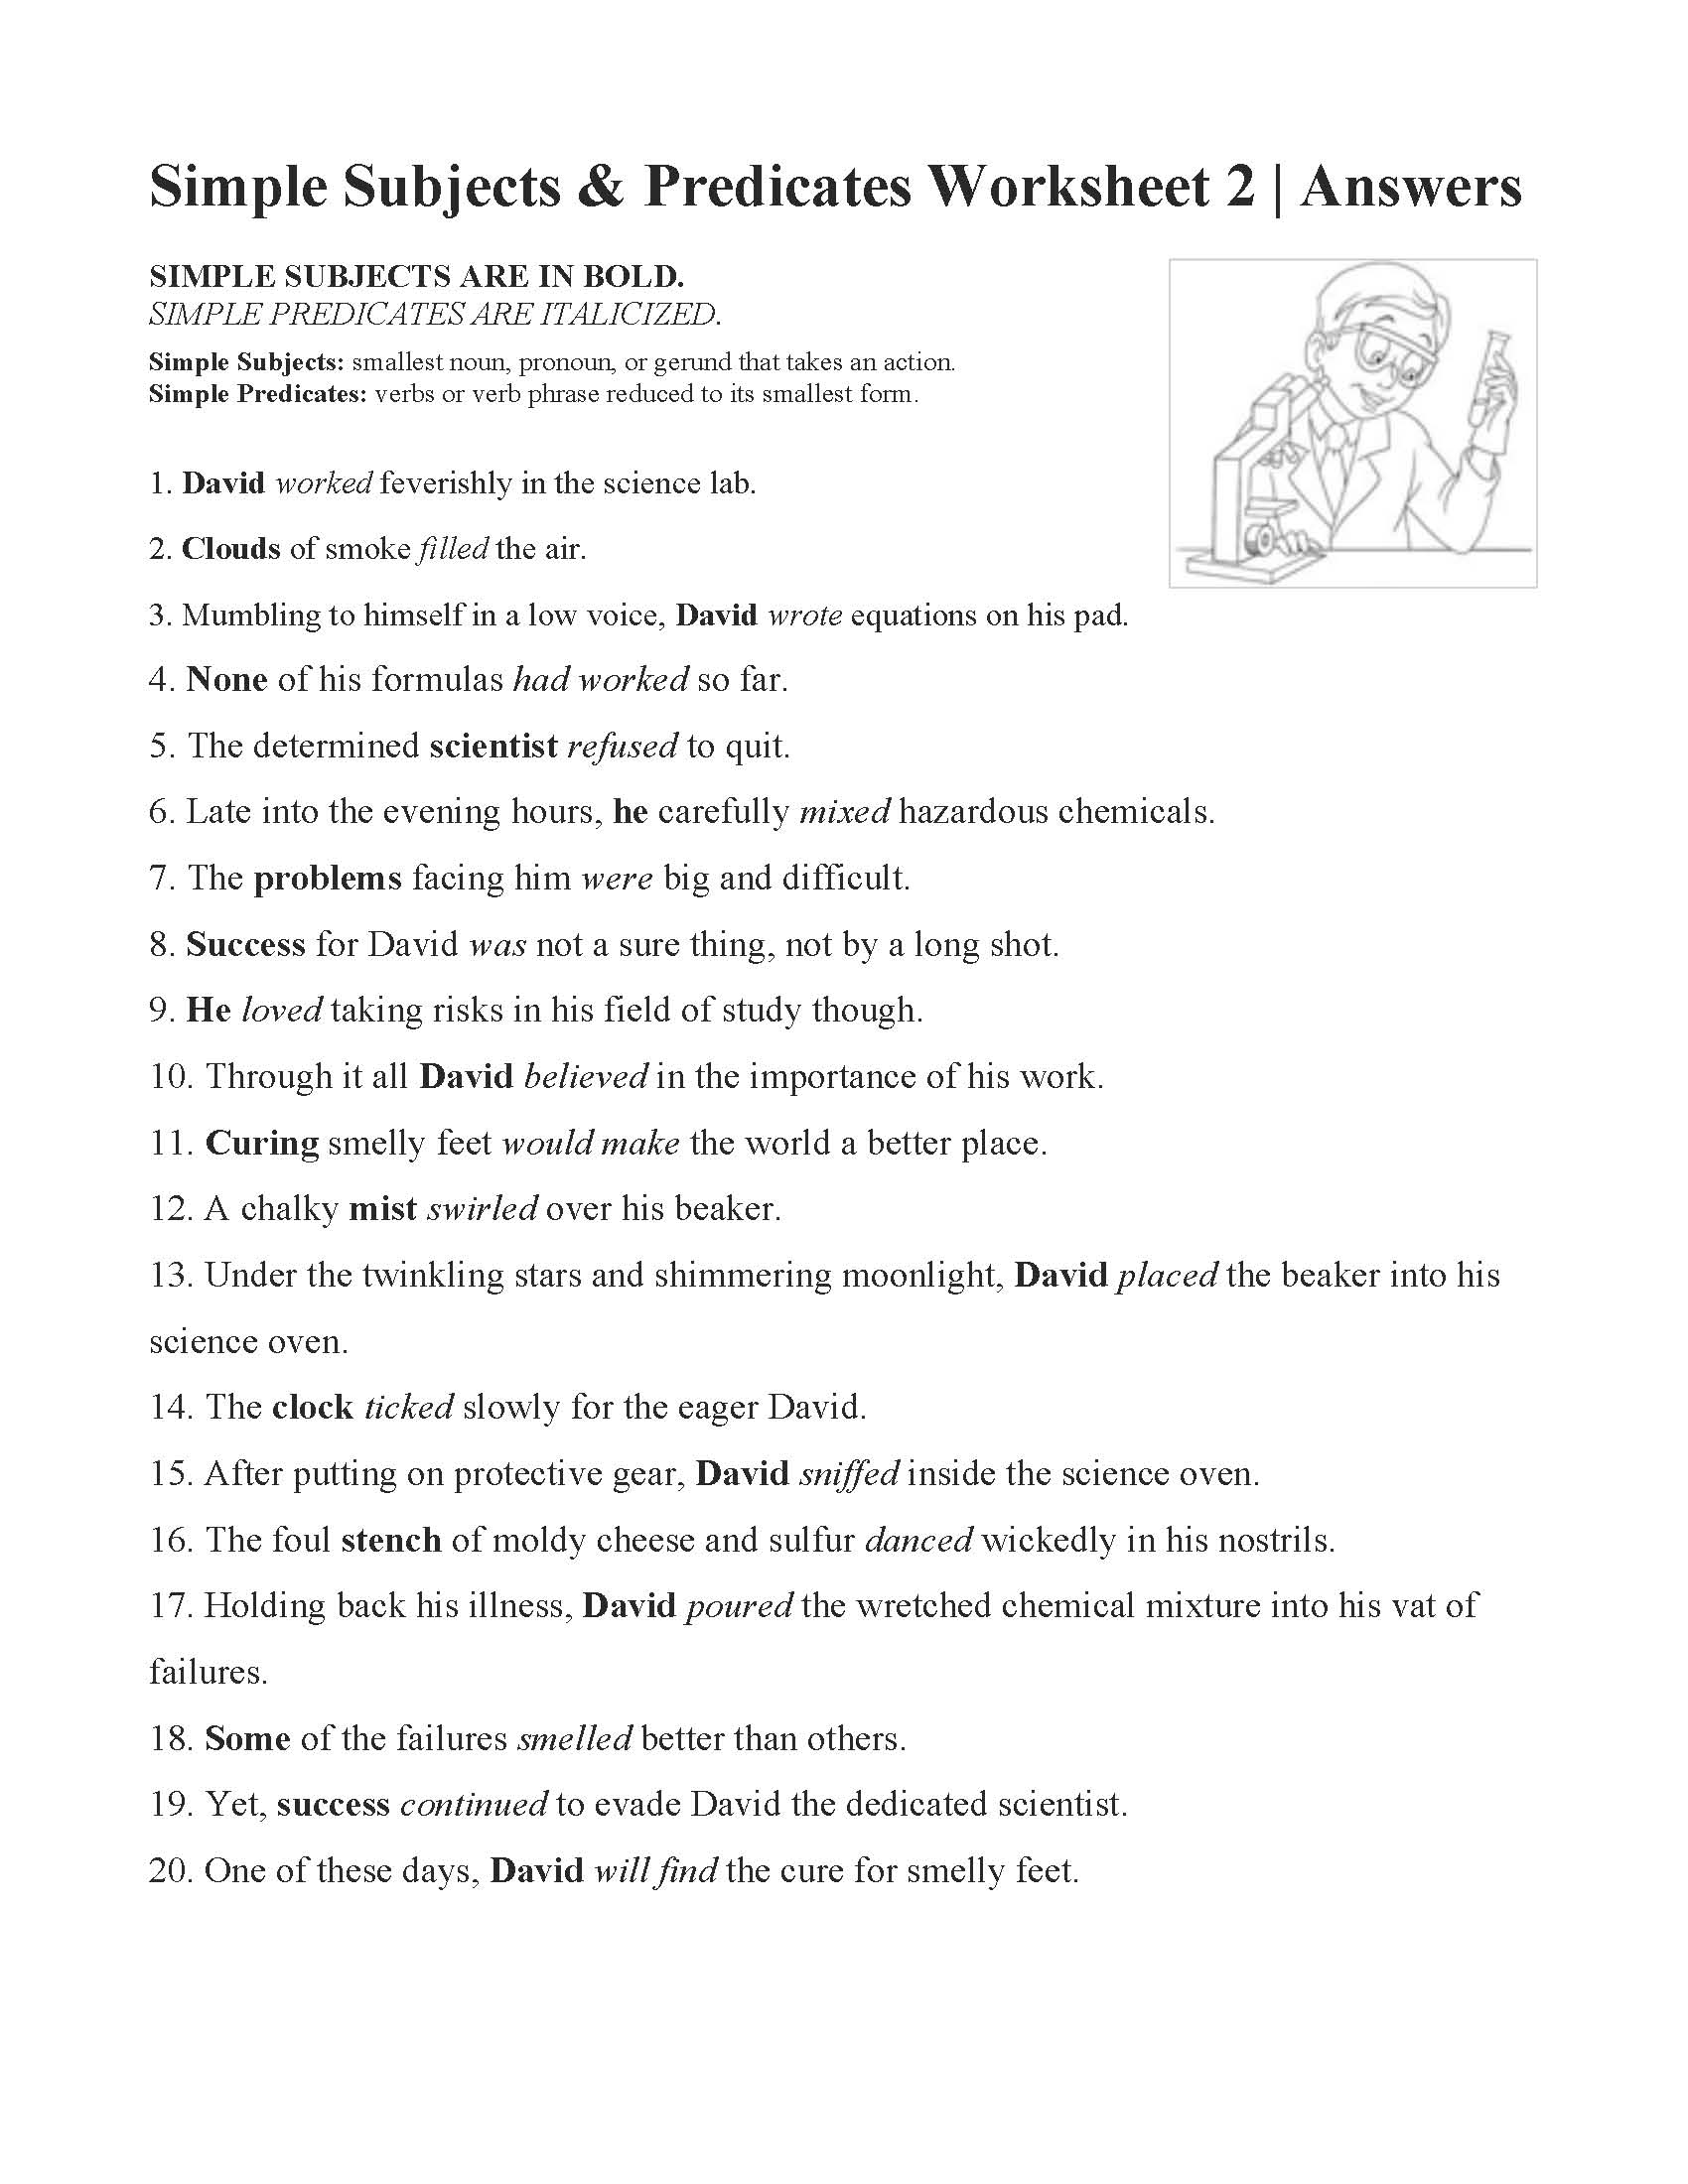 Simple Subjects and Predicates Worksheet 20  Answers Regarding Subjects And Predicates Worksheet